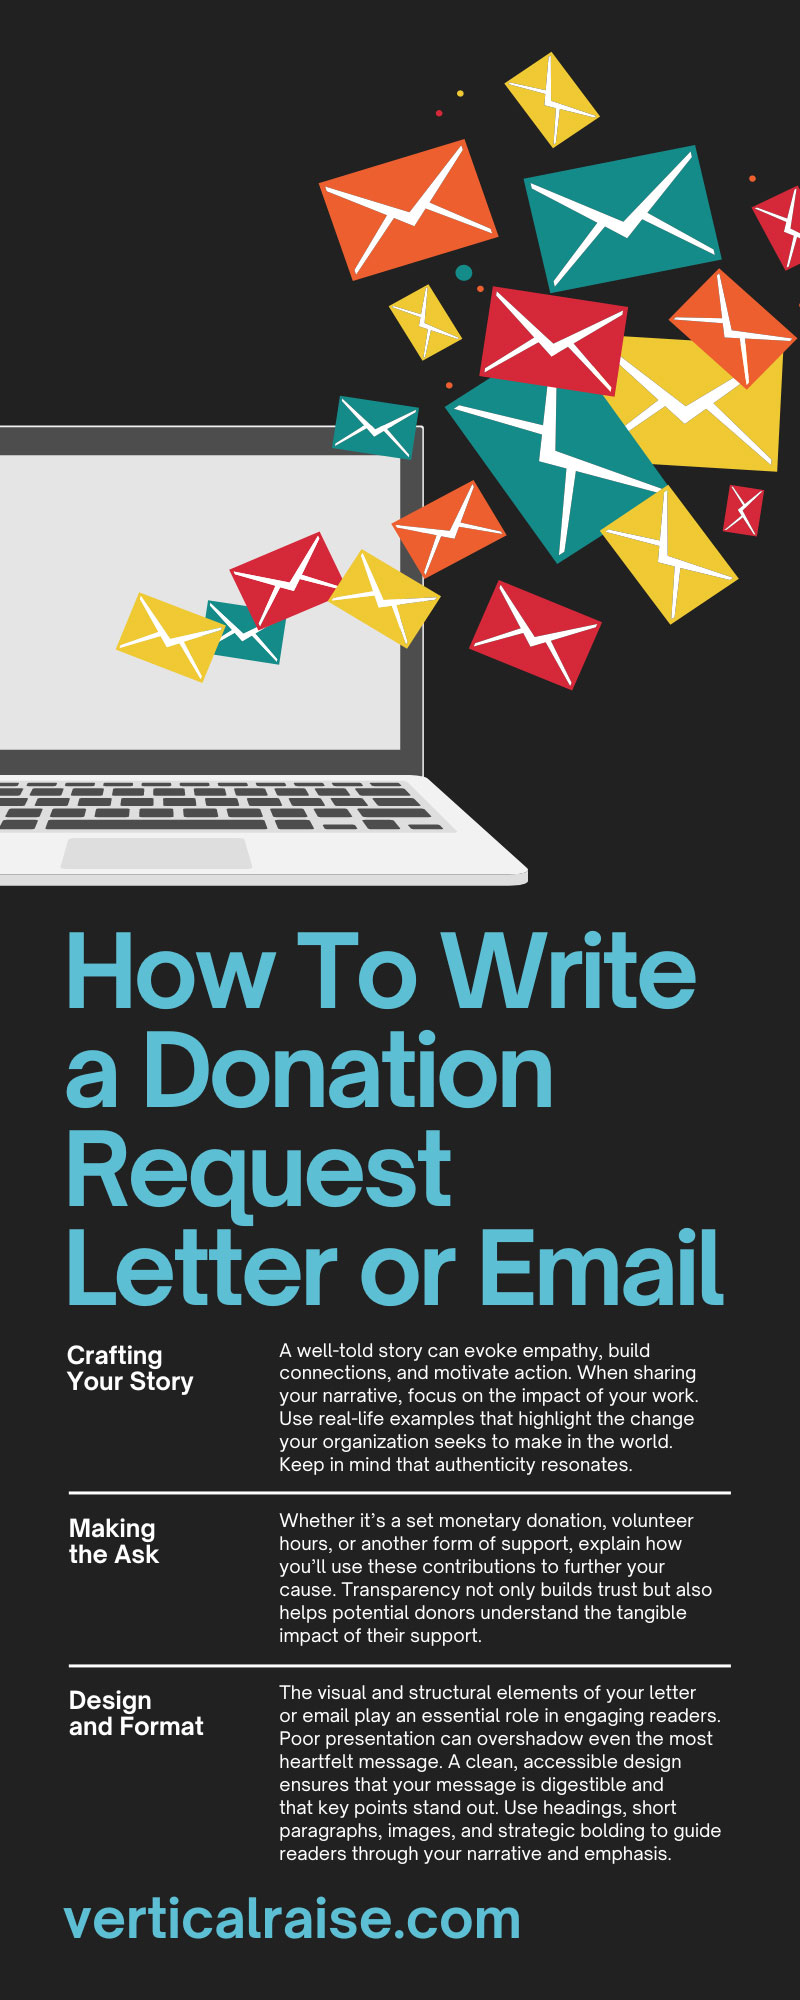 How To Write a Donation Request Letter or Email